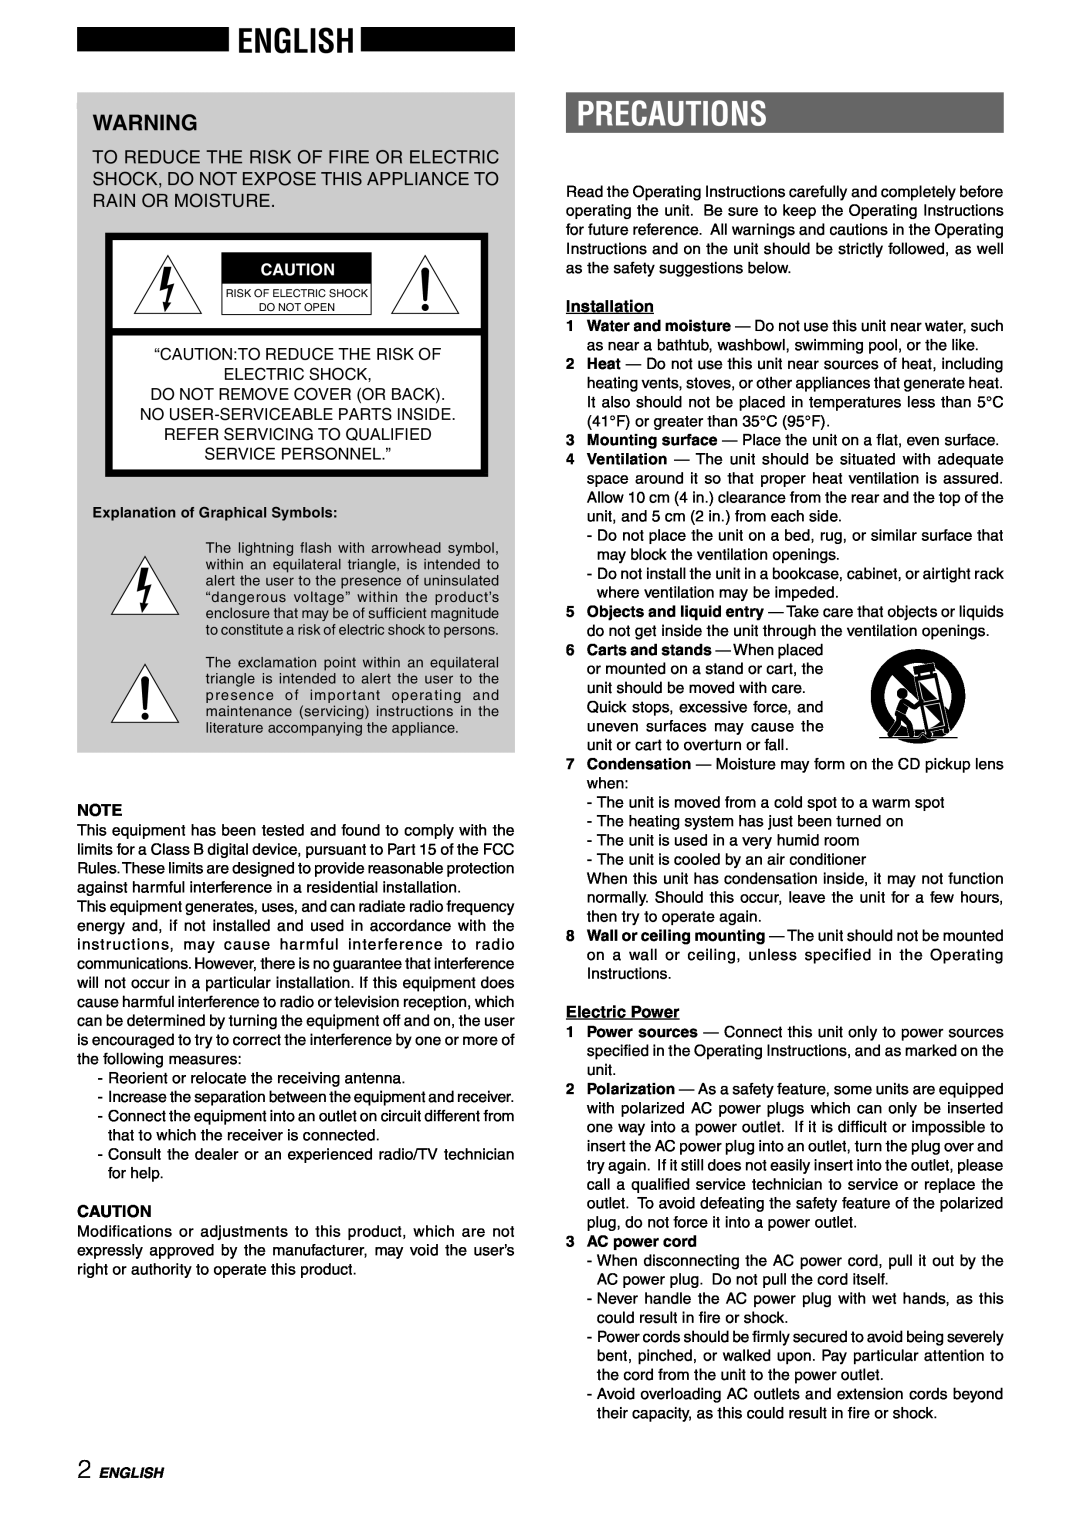 Sony NSX-AJ80 manual English, Precautions, “Caution:To Reduce The Risk Of Electric Shock, Installation, Electric Power 